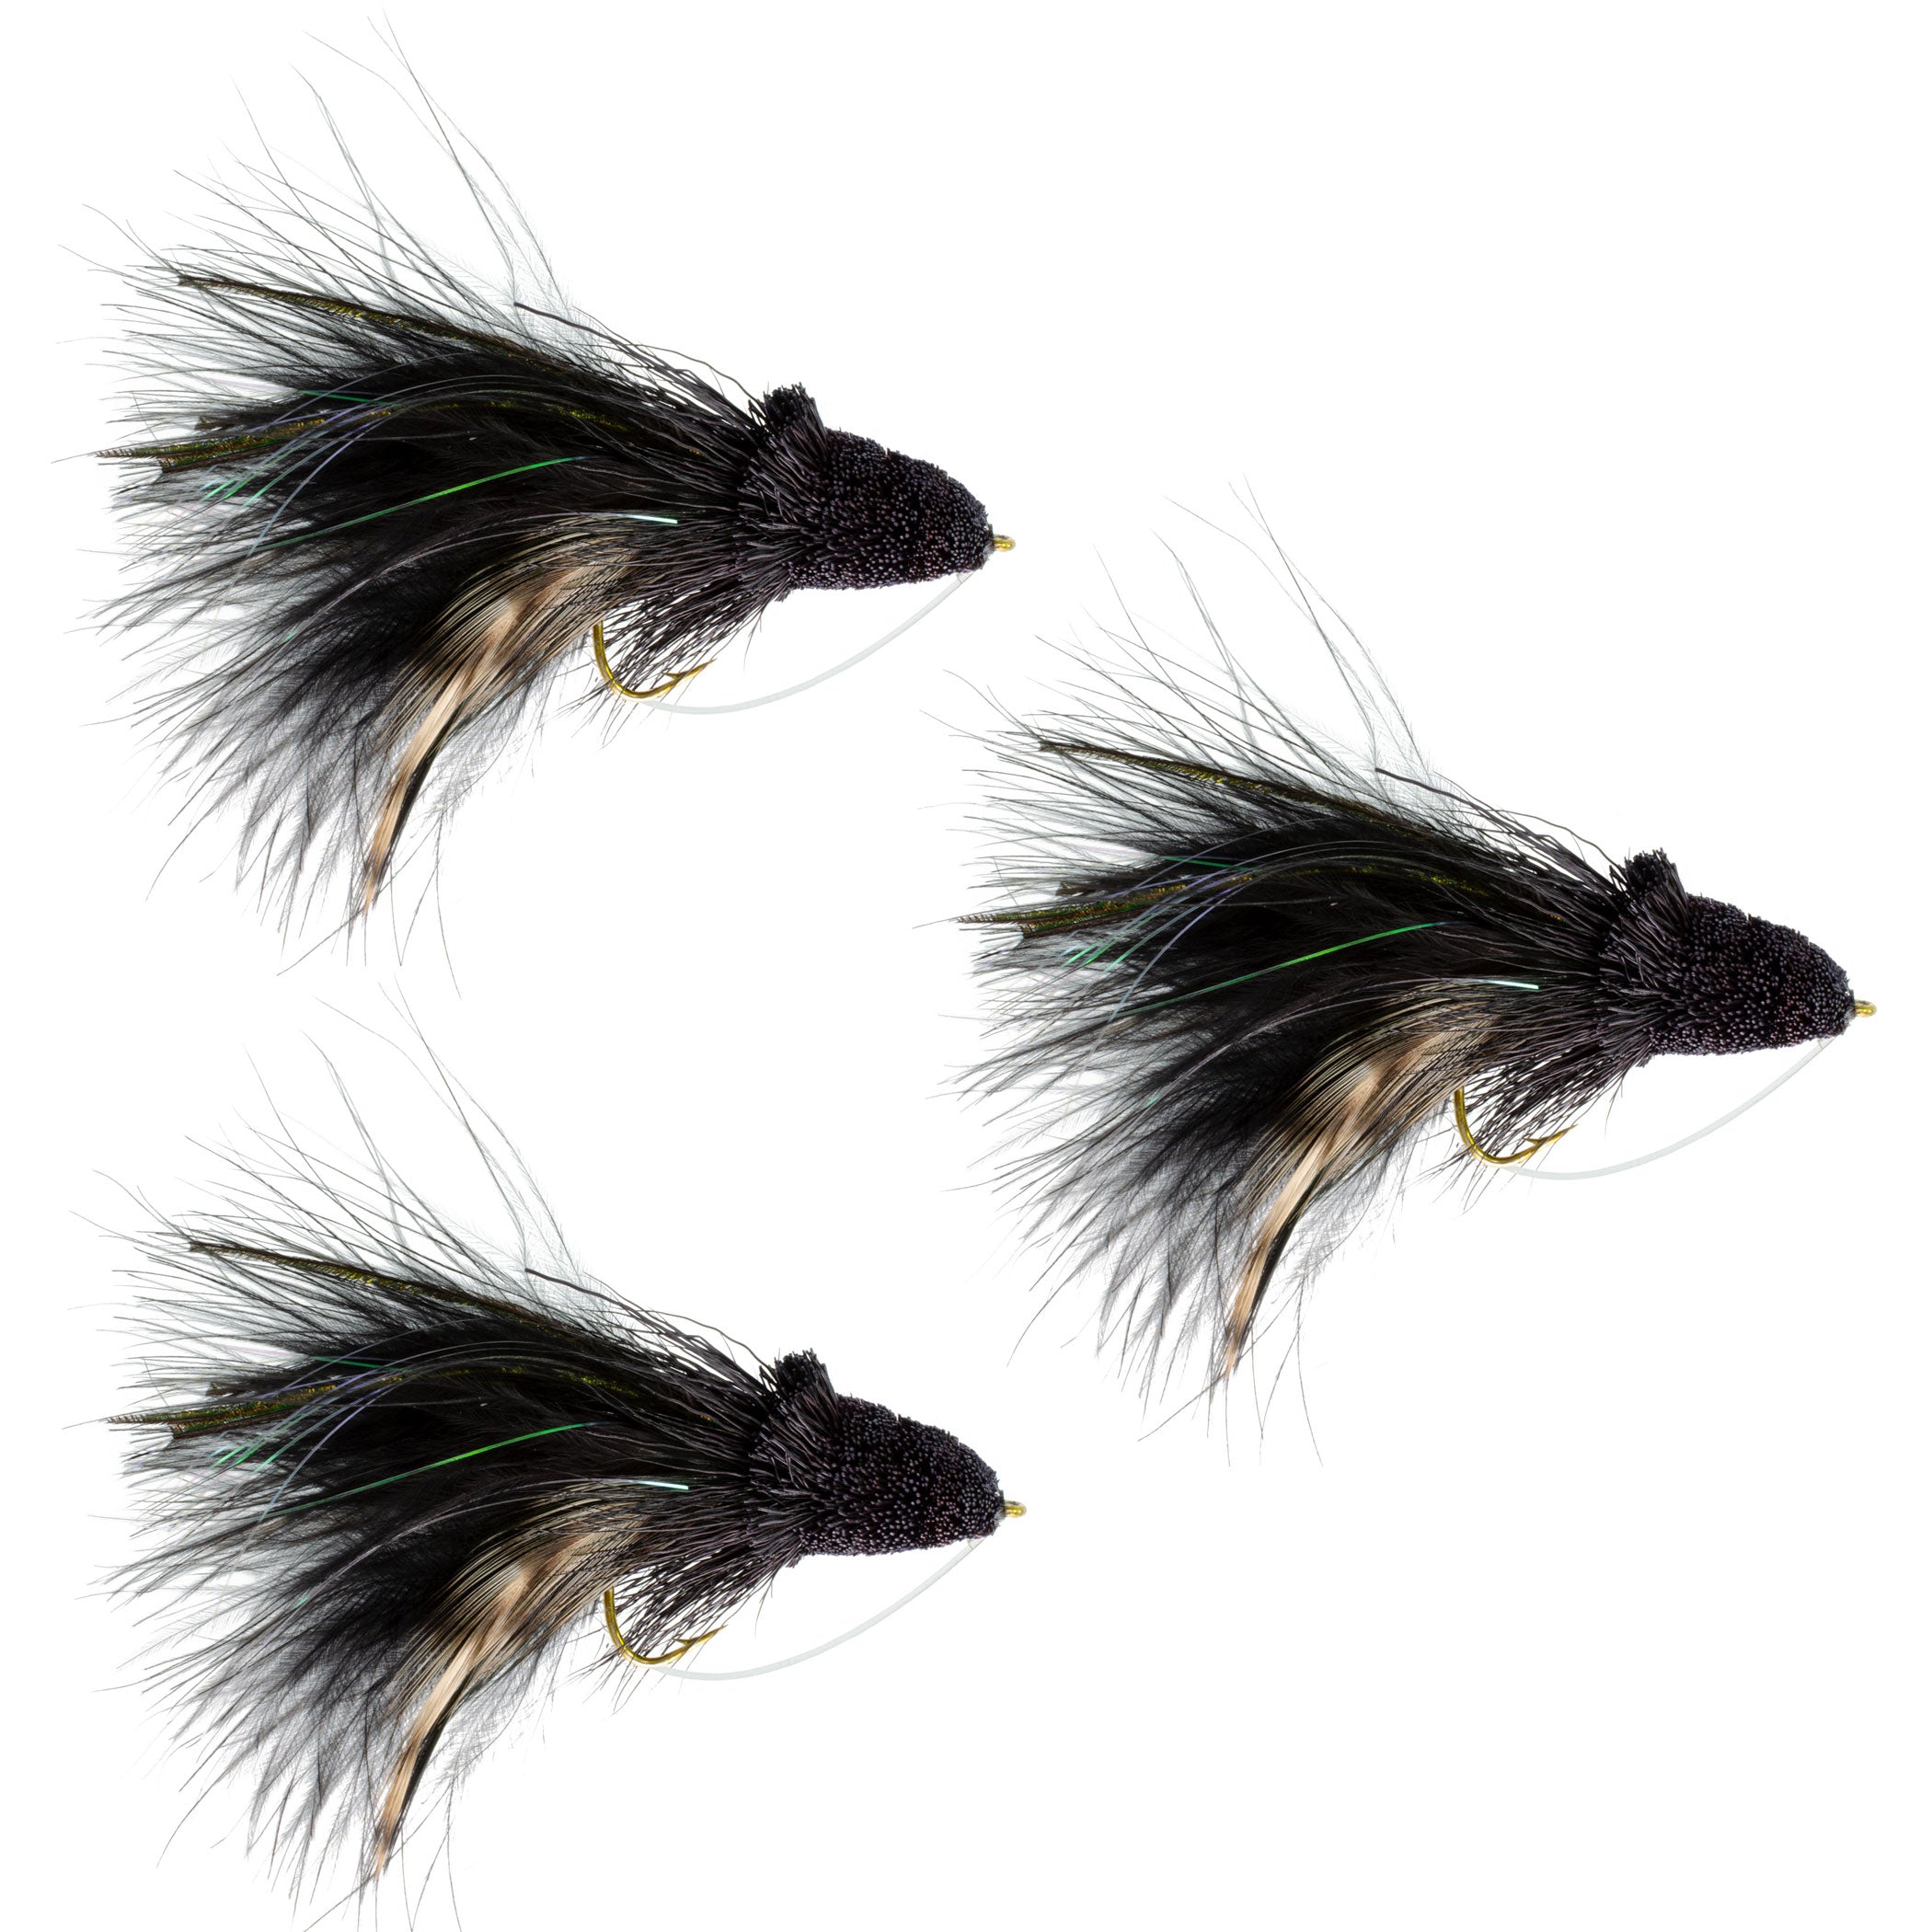 3 Pack Deer Hair Diver Size 4 - Swimming Frog Bass Fly Fishing Bug Wid